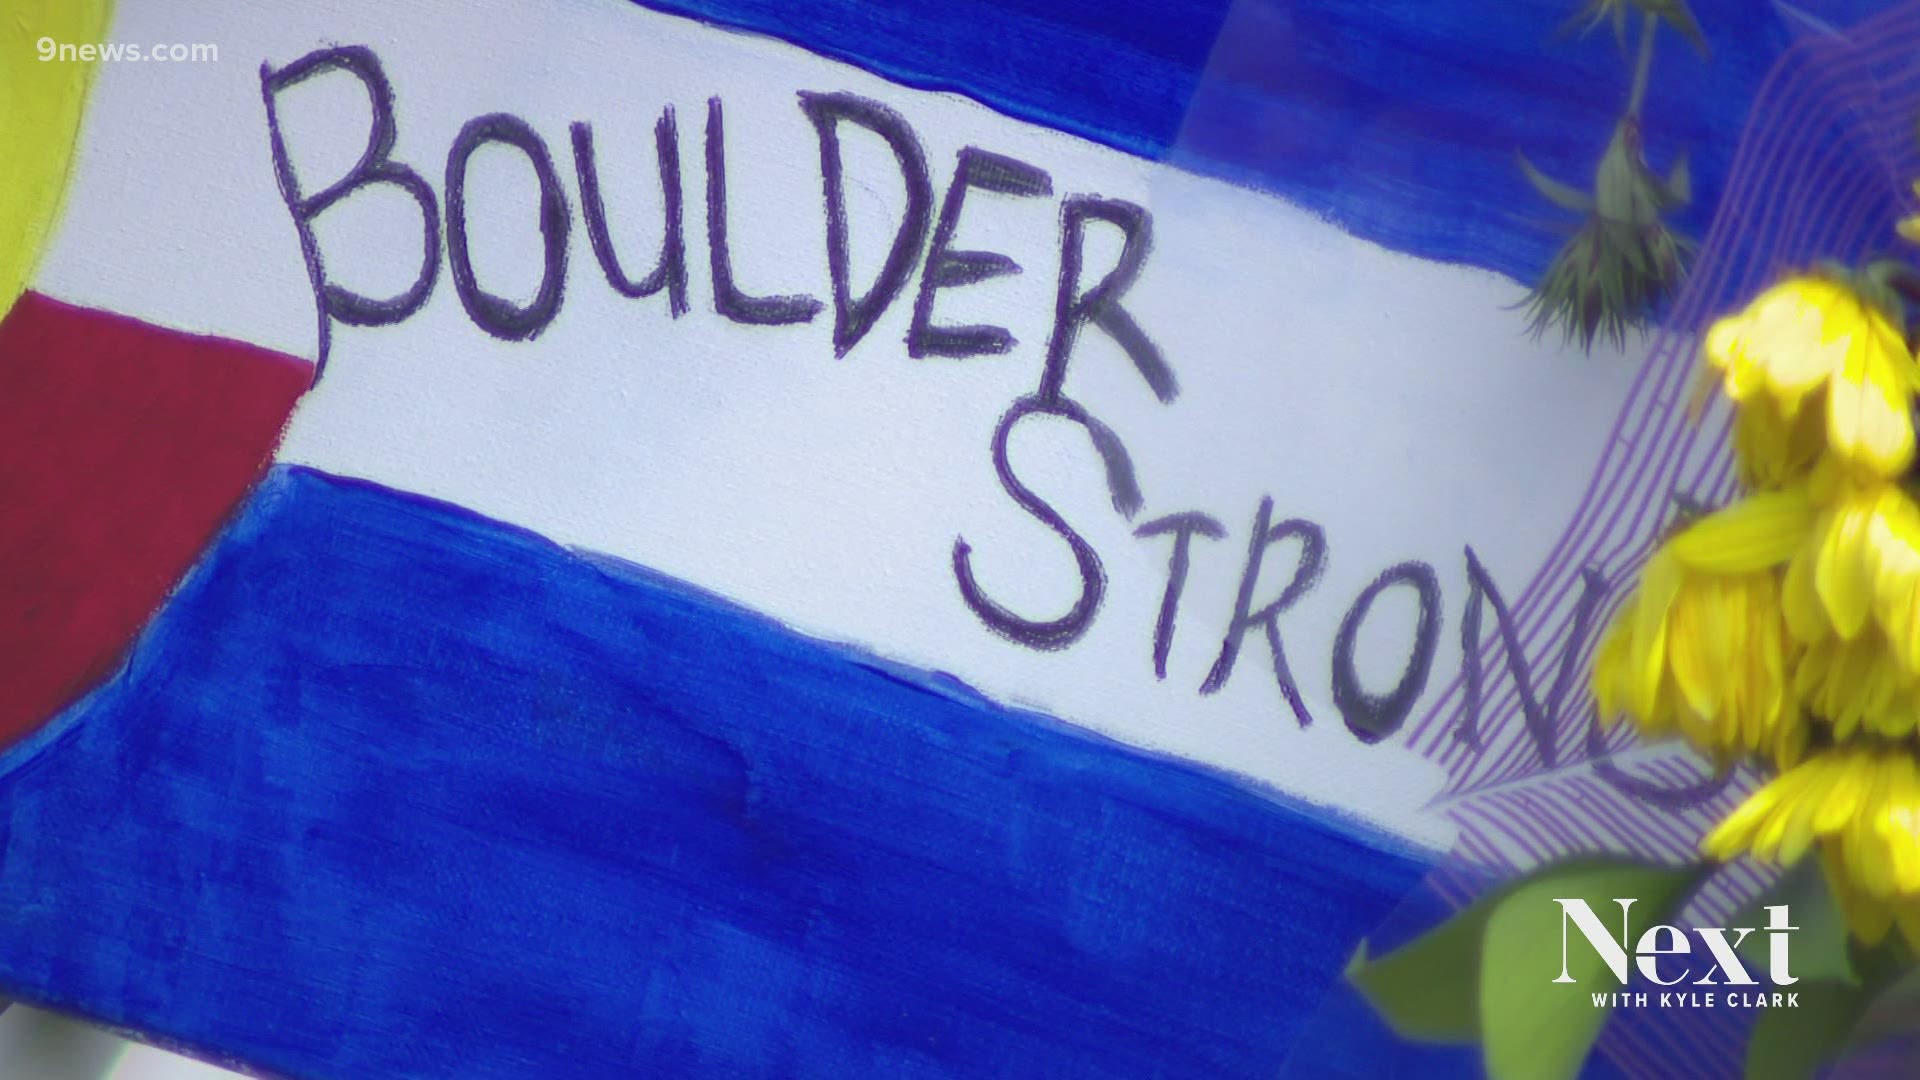 When you see someone do something concerning, how do you say something? We looked at how Coloradans can report concerns before a tragedy like the Boulder shooting.